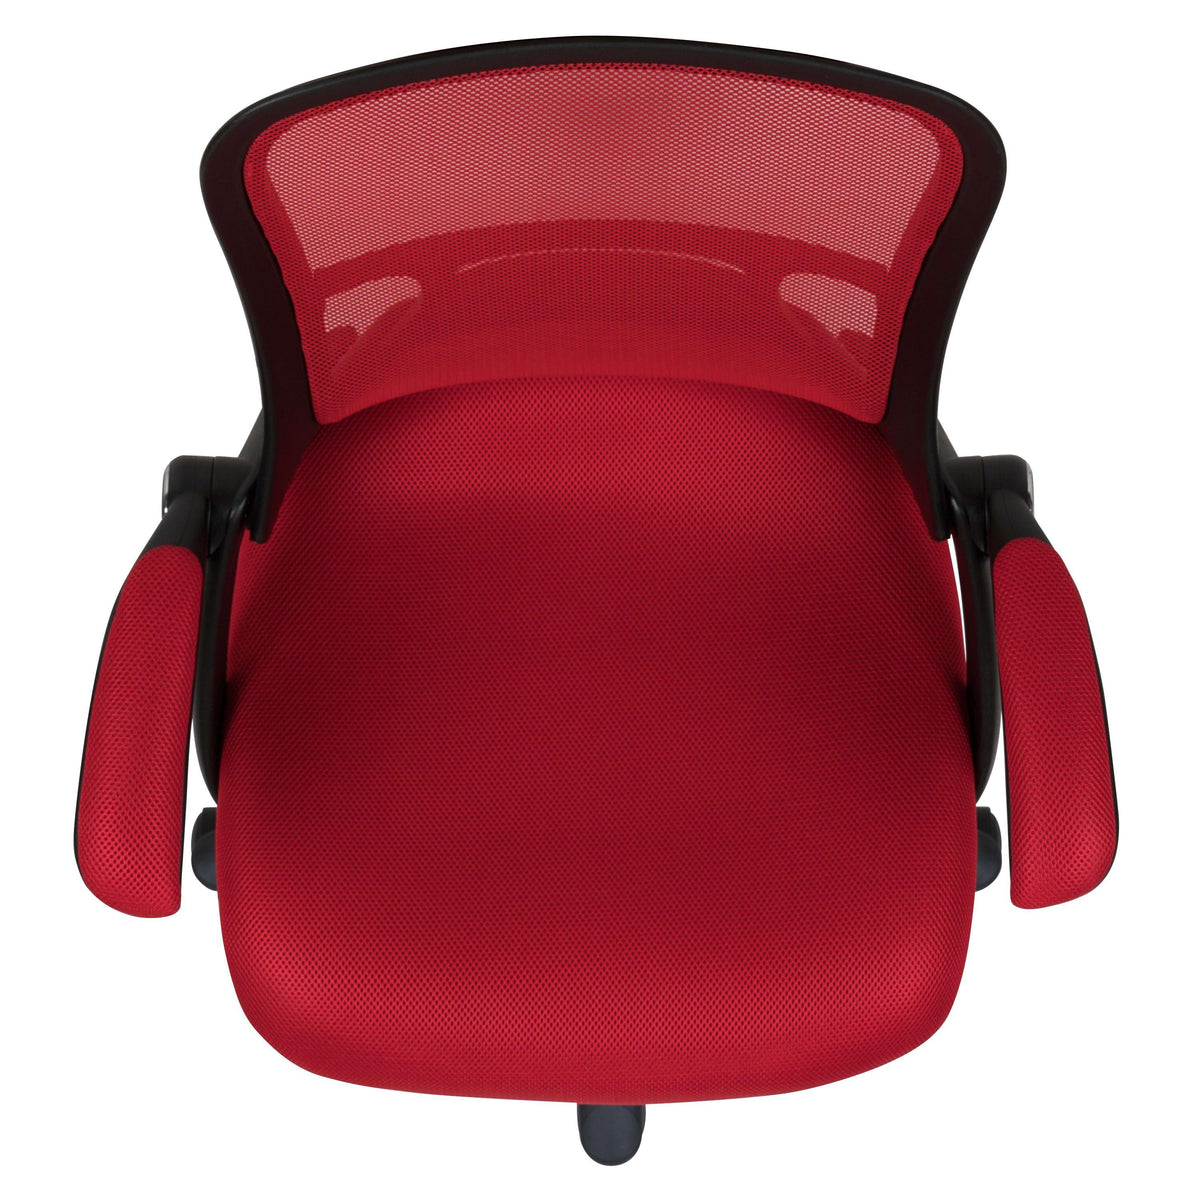 Red |#| High Back Red Mesh Ergonomic Office Chair with Black Frame and Flip-up Arms